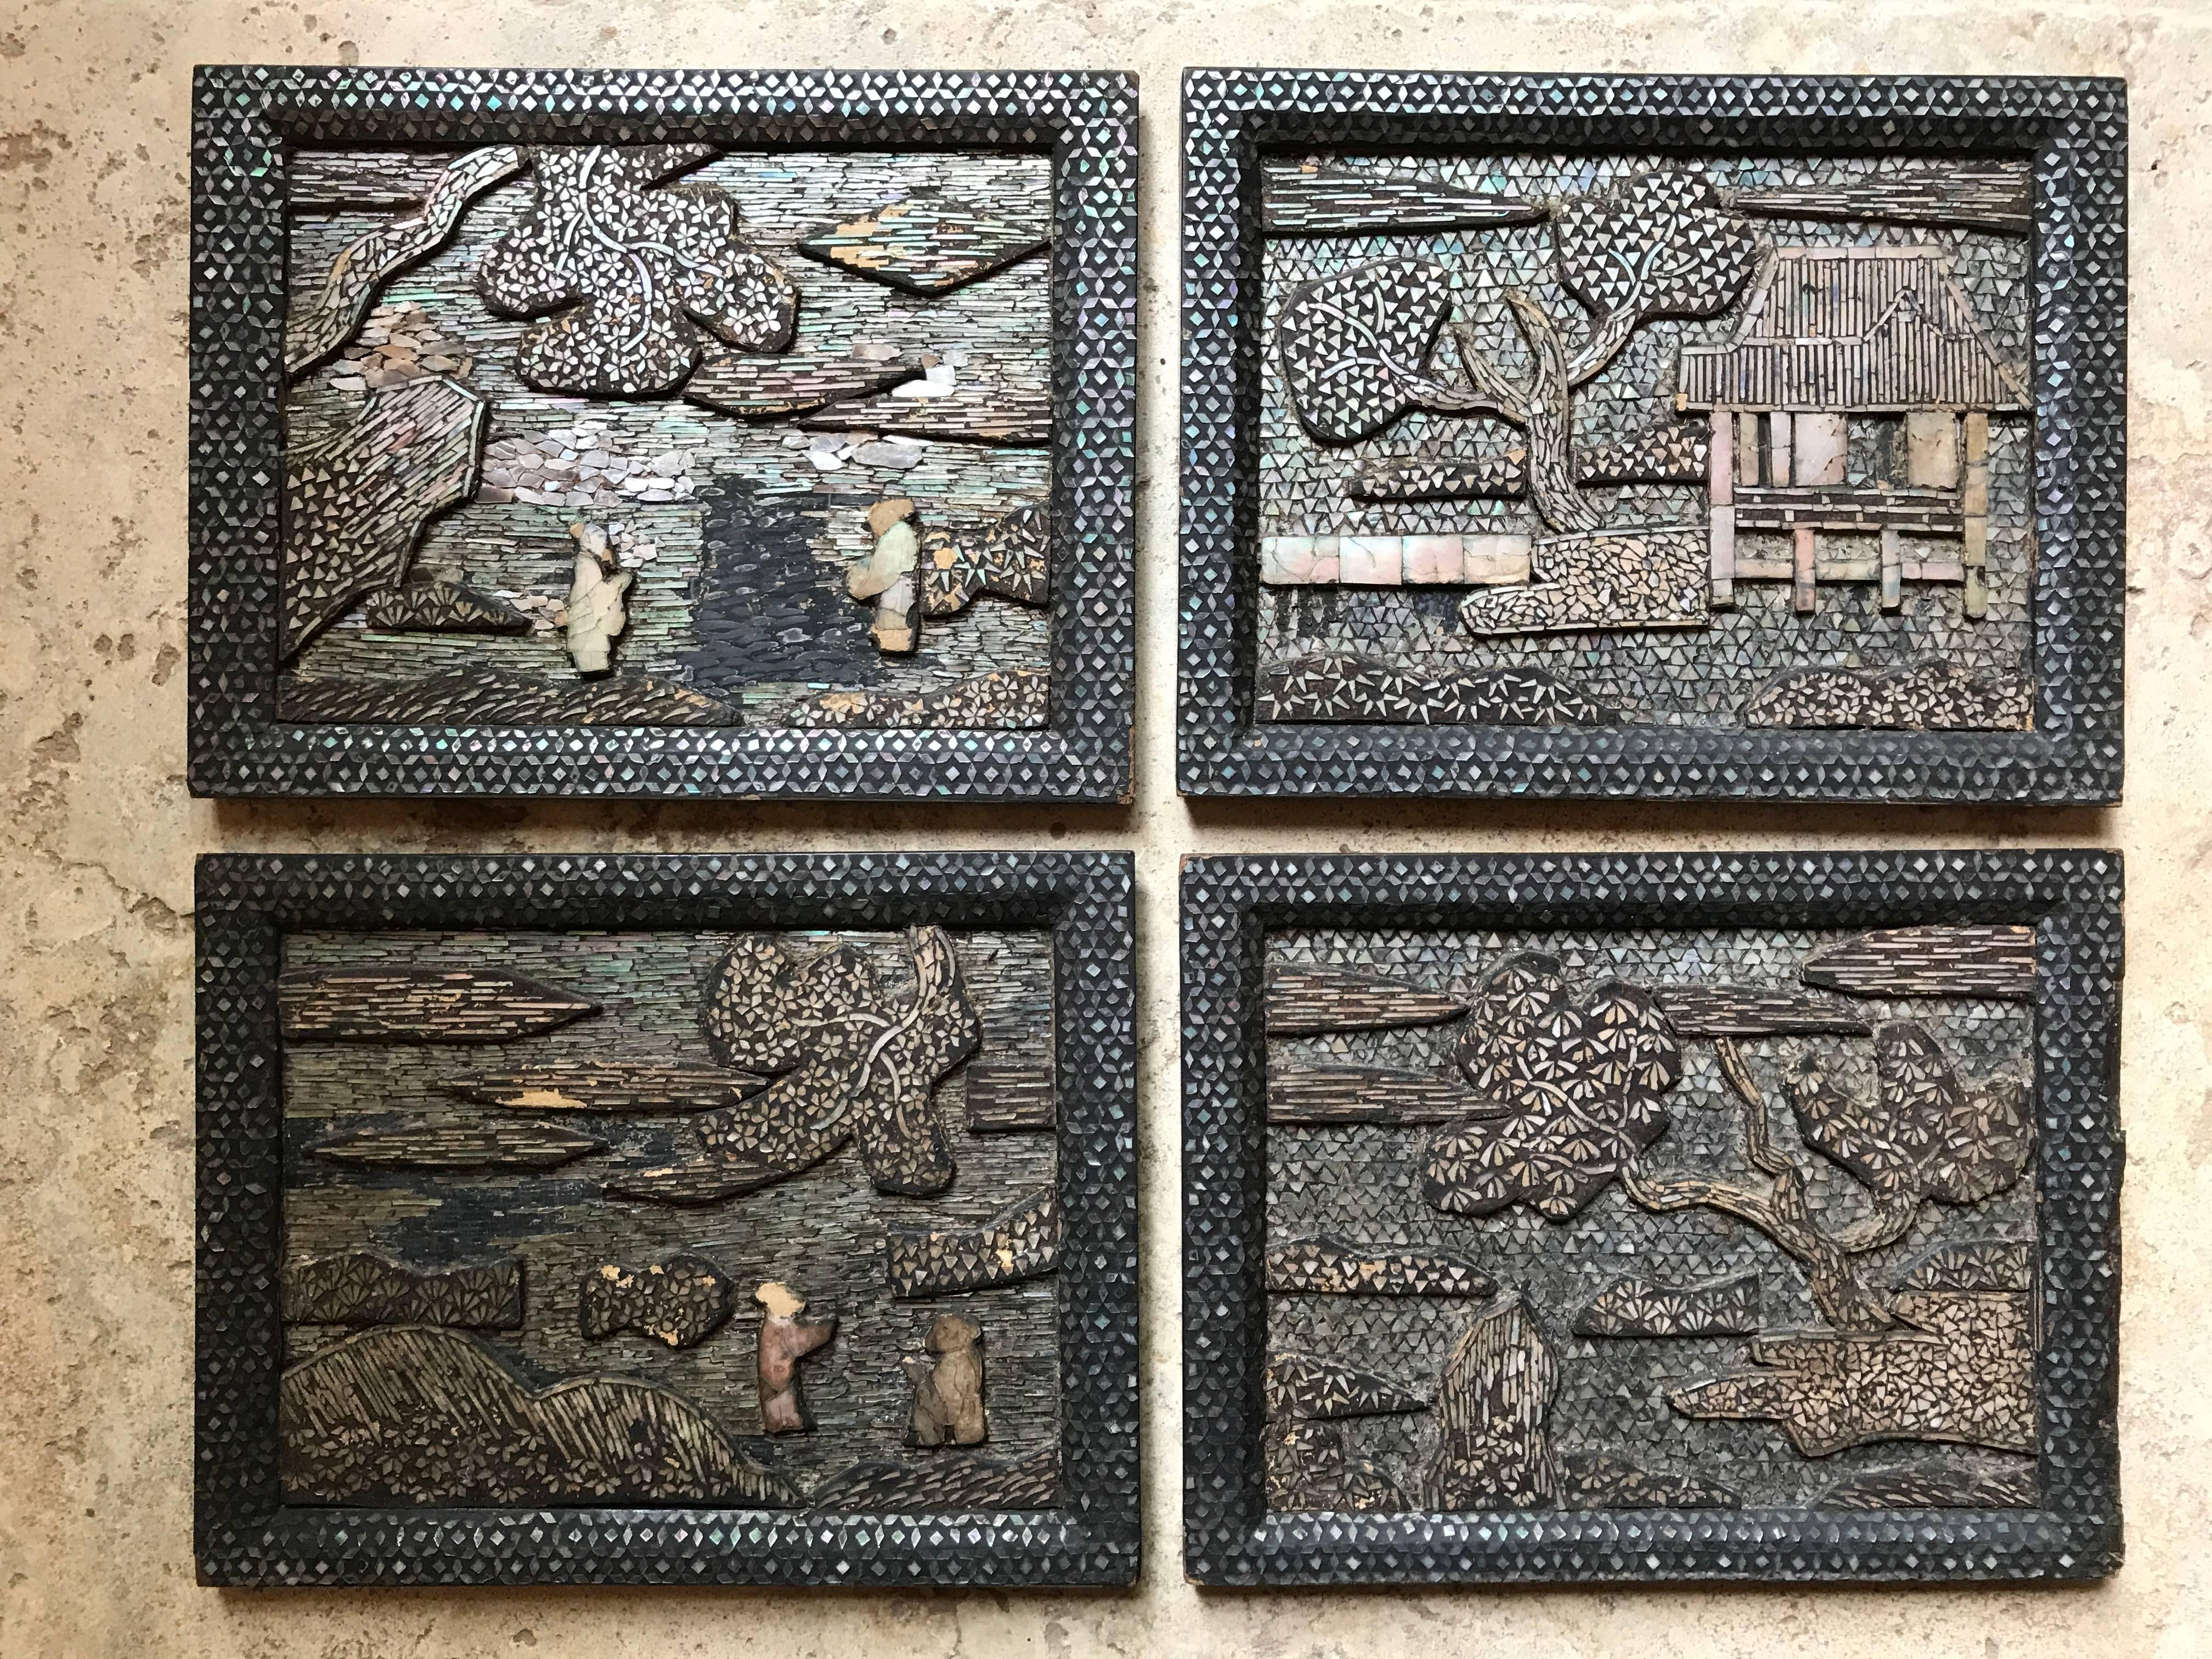 Here's a fine instant collection of four Japan antique mother-of-pearl inlaid wooden panels in the Chinese manner including trees, buildings, and colorful village scenes. These panels would make a wonderful quartet framed and displayed on your